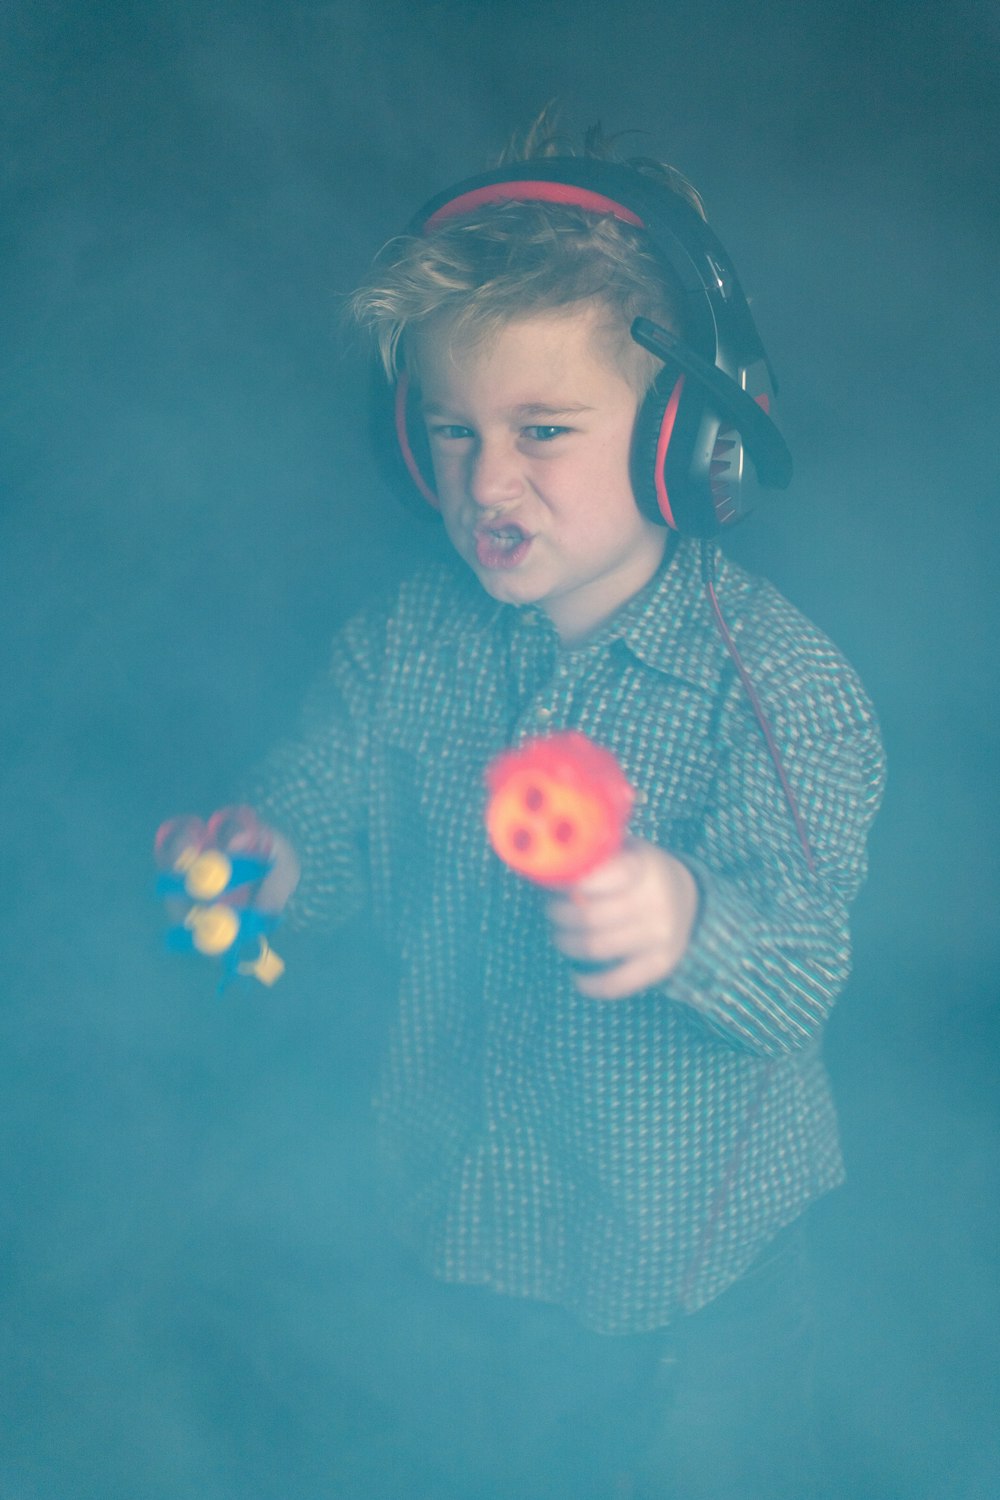 a young boy wearing headphones and holding a ball